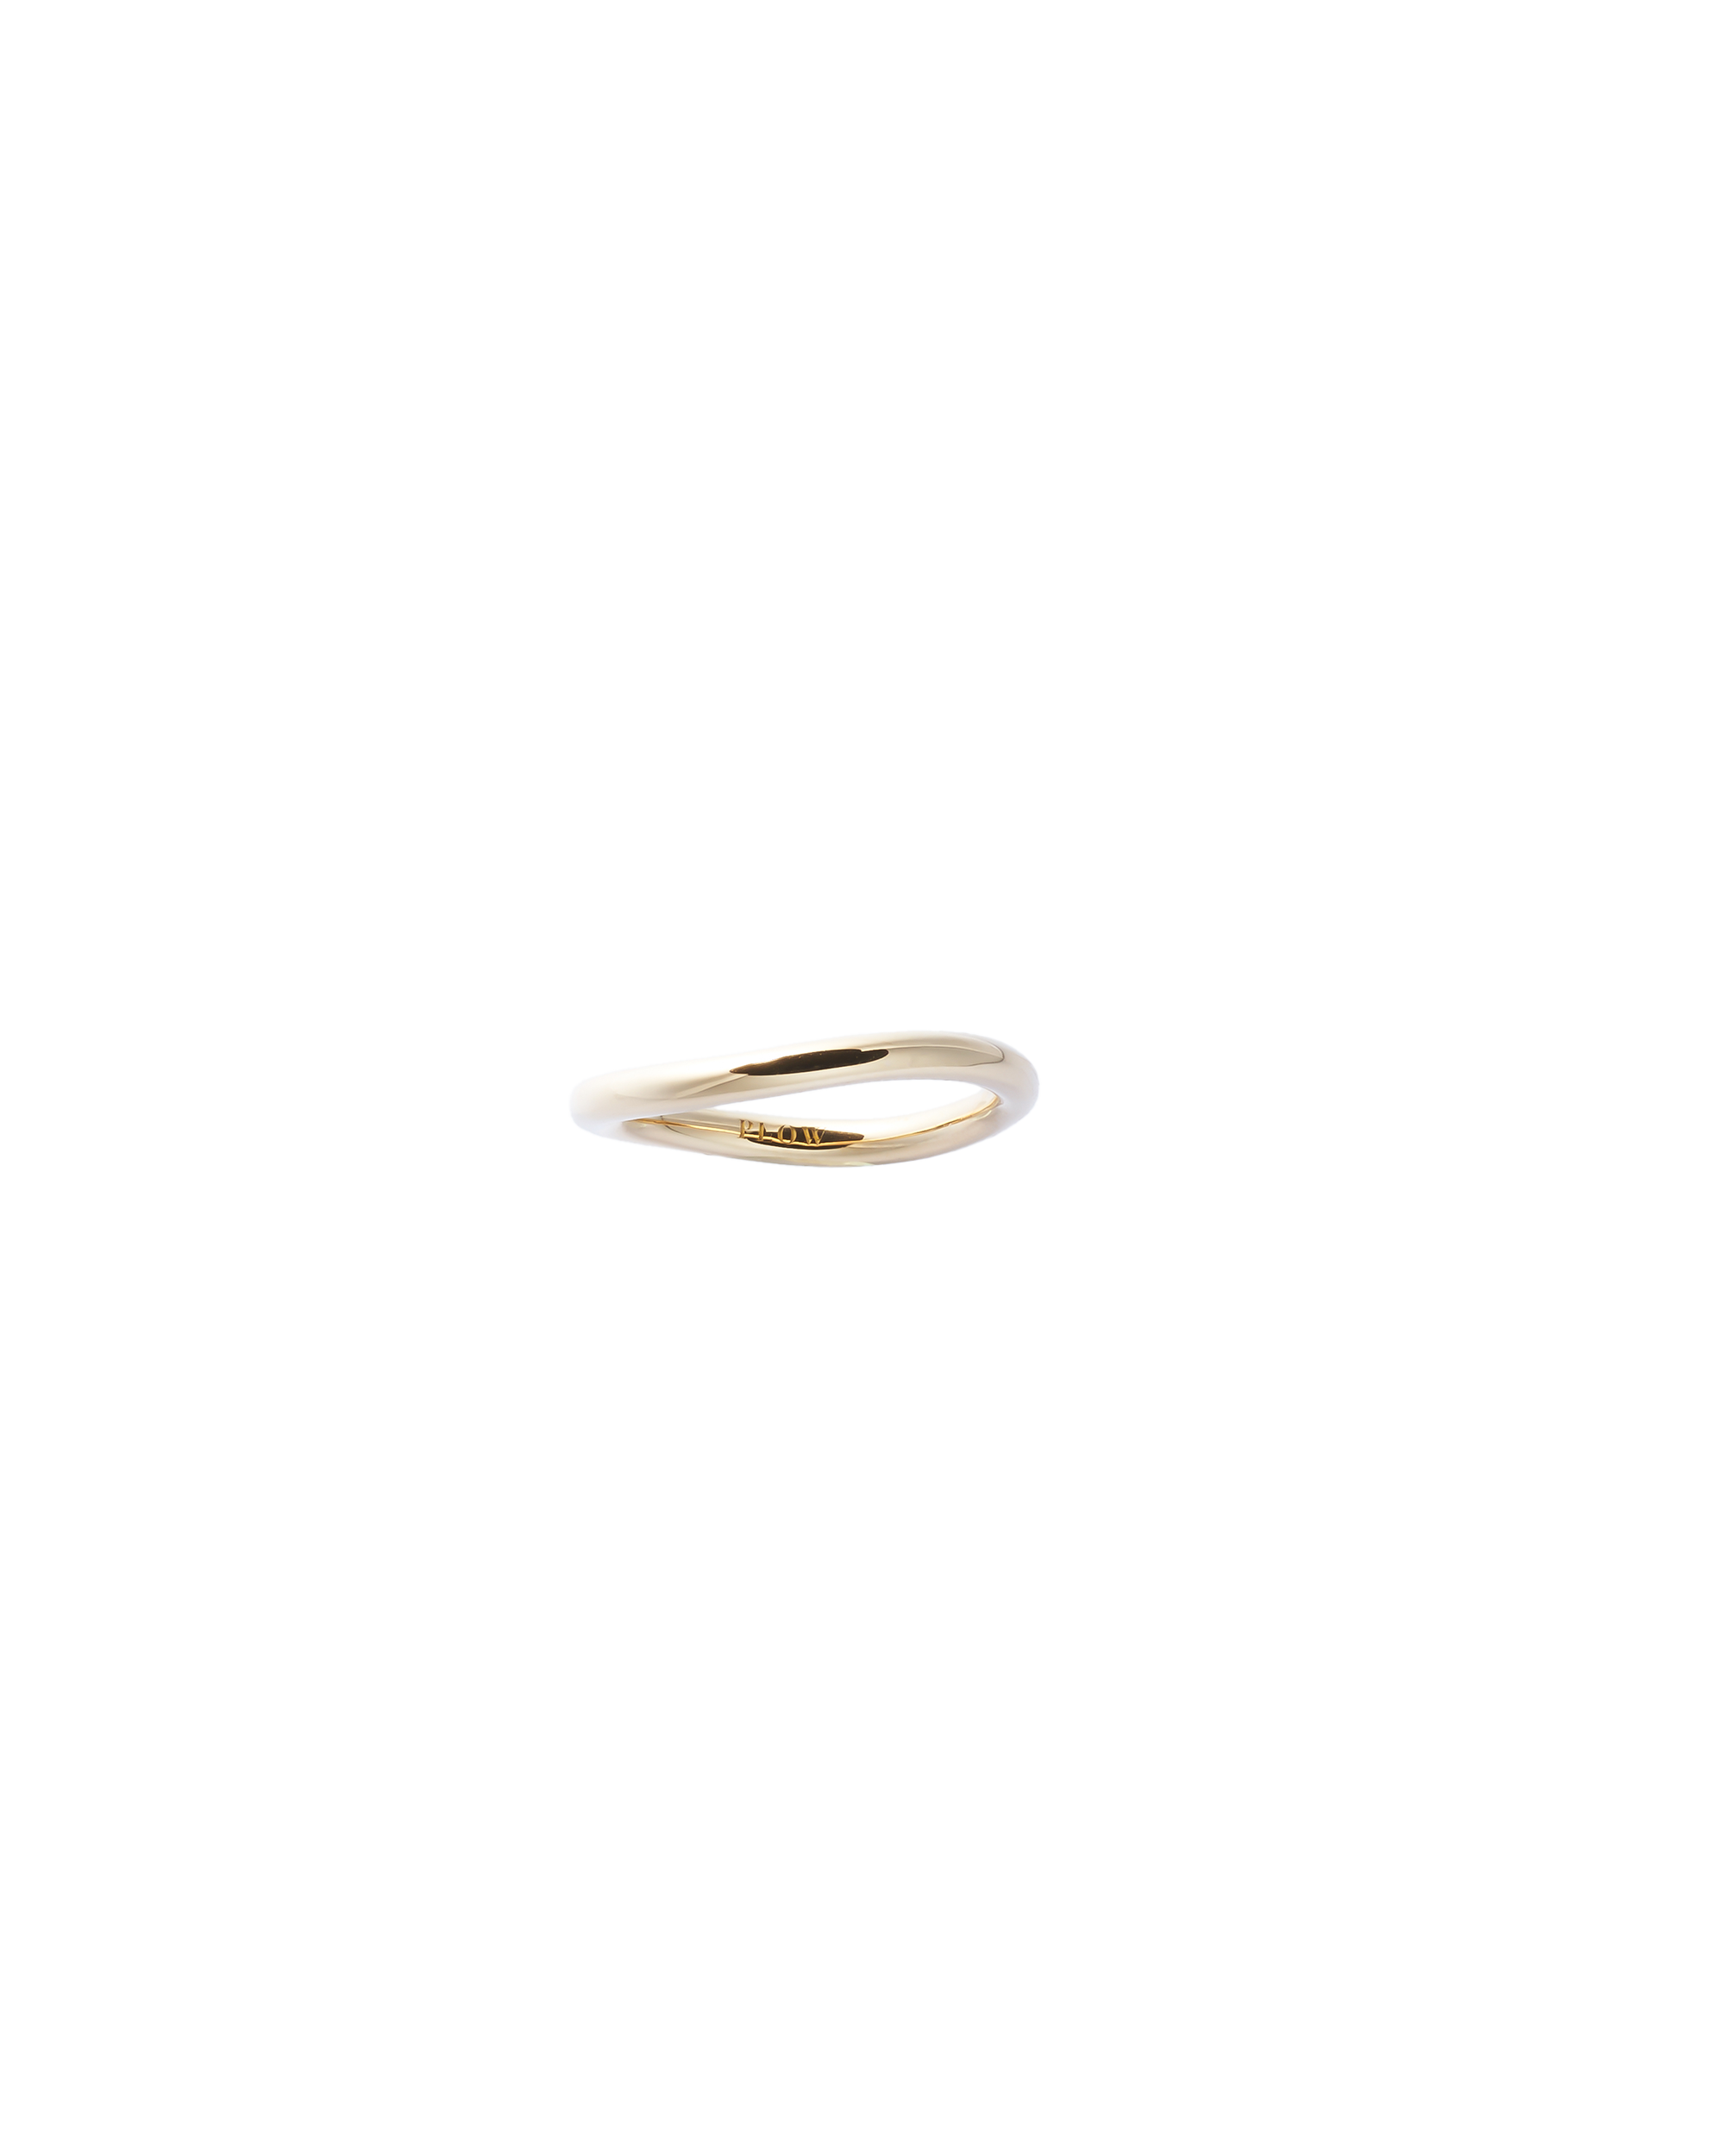 Fortune Wavy Ring M -K18-